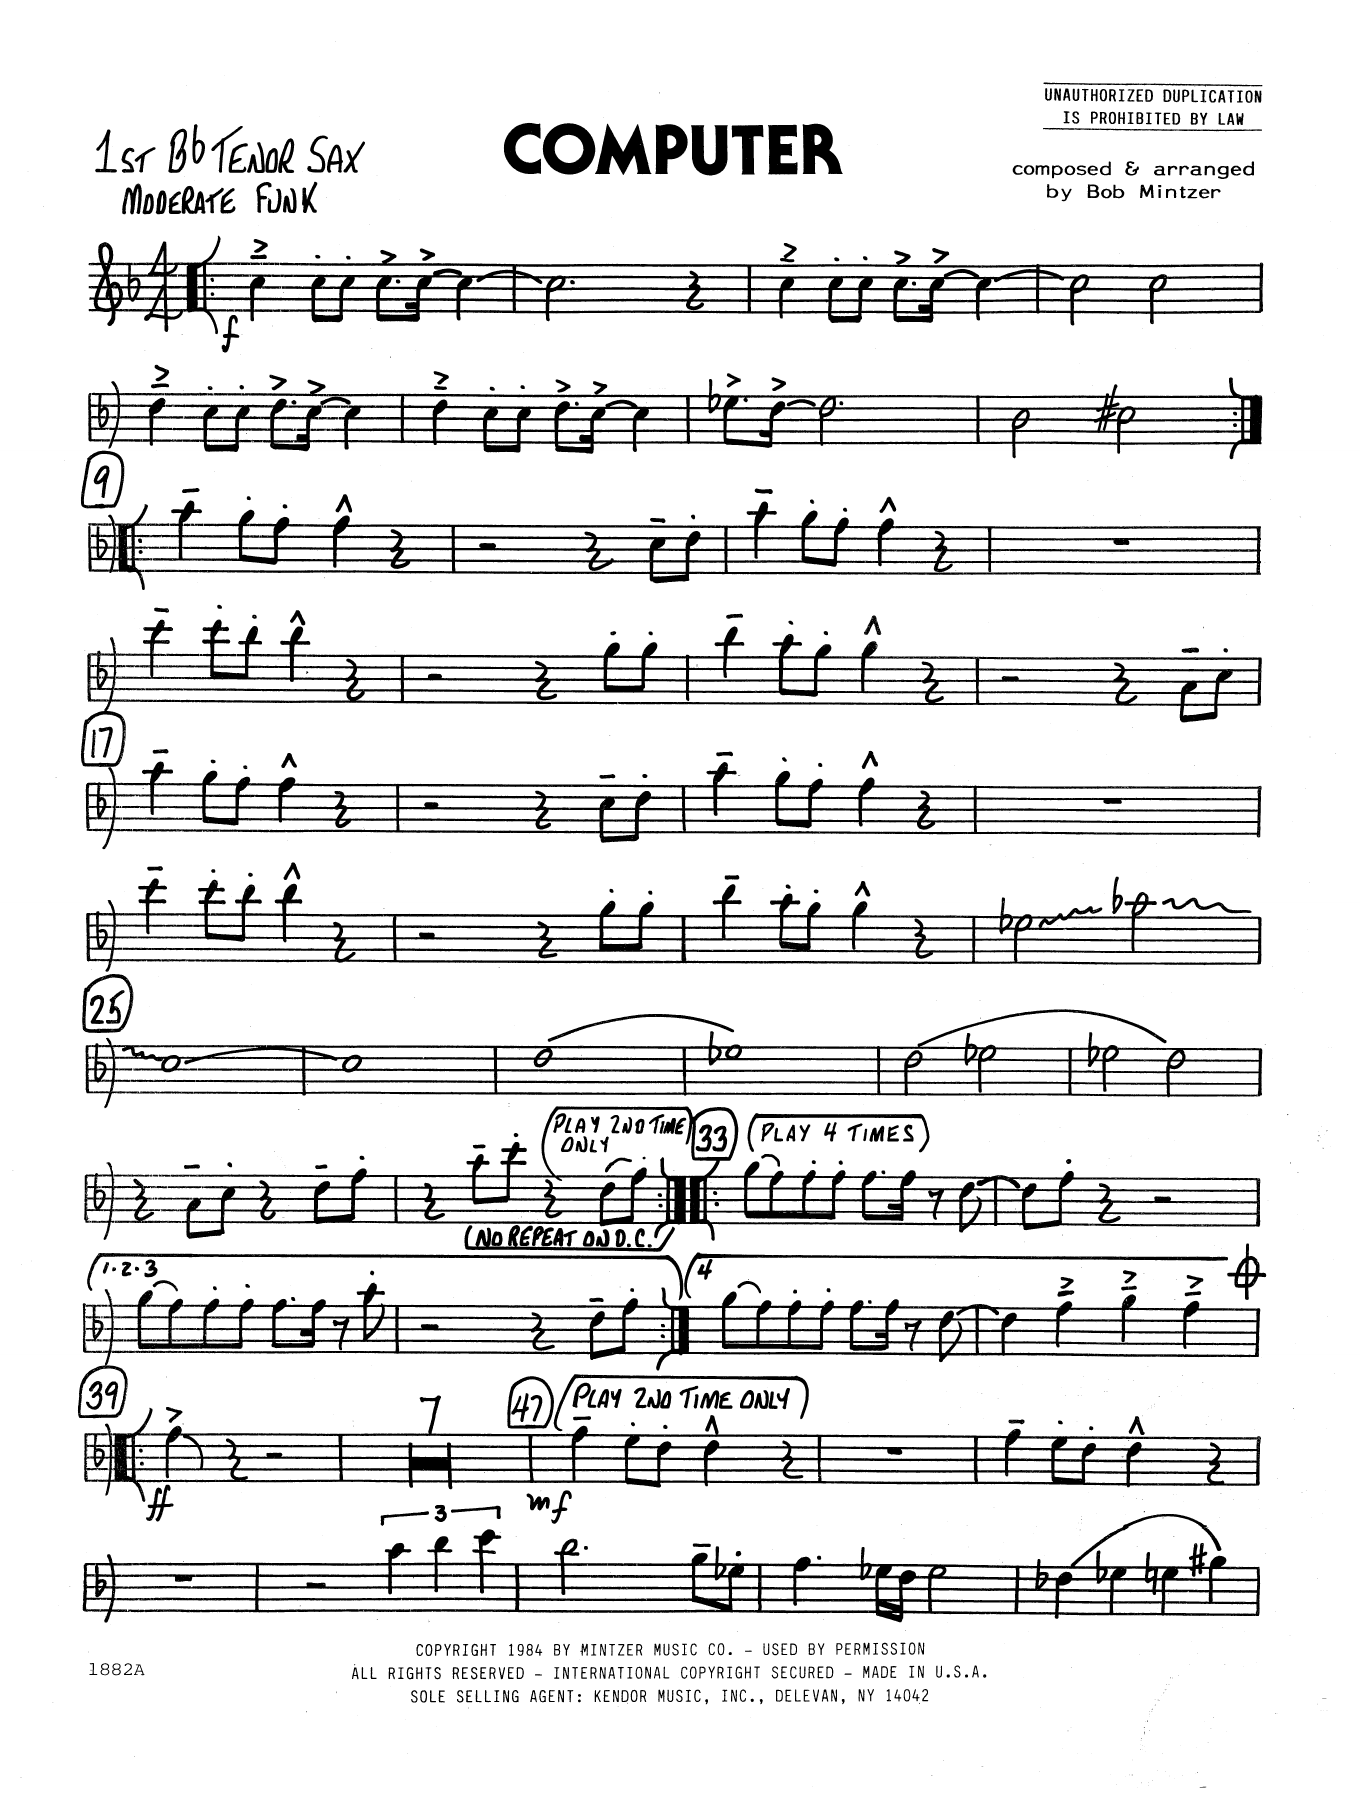 Bob Mintzer Computer - 1st Tenor Saxophone sheet music preview music notes and score for Jazz Ensemble including 2 page(s)